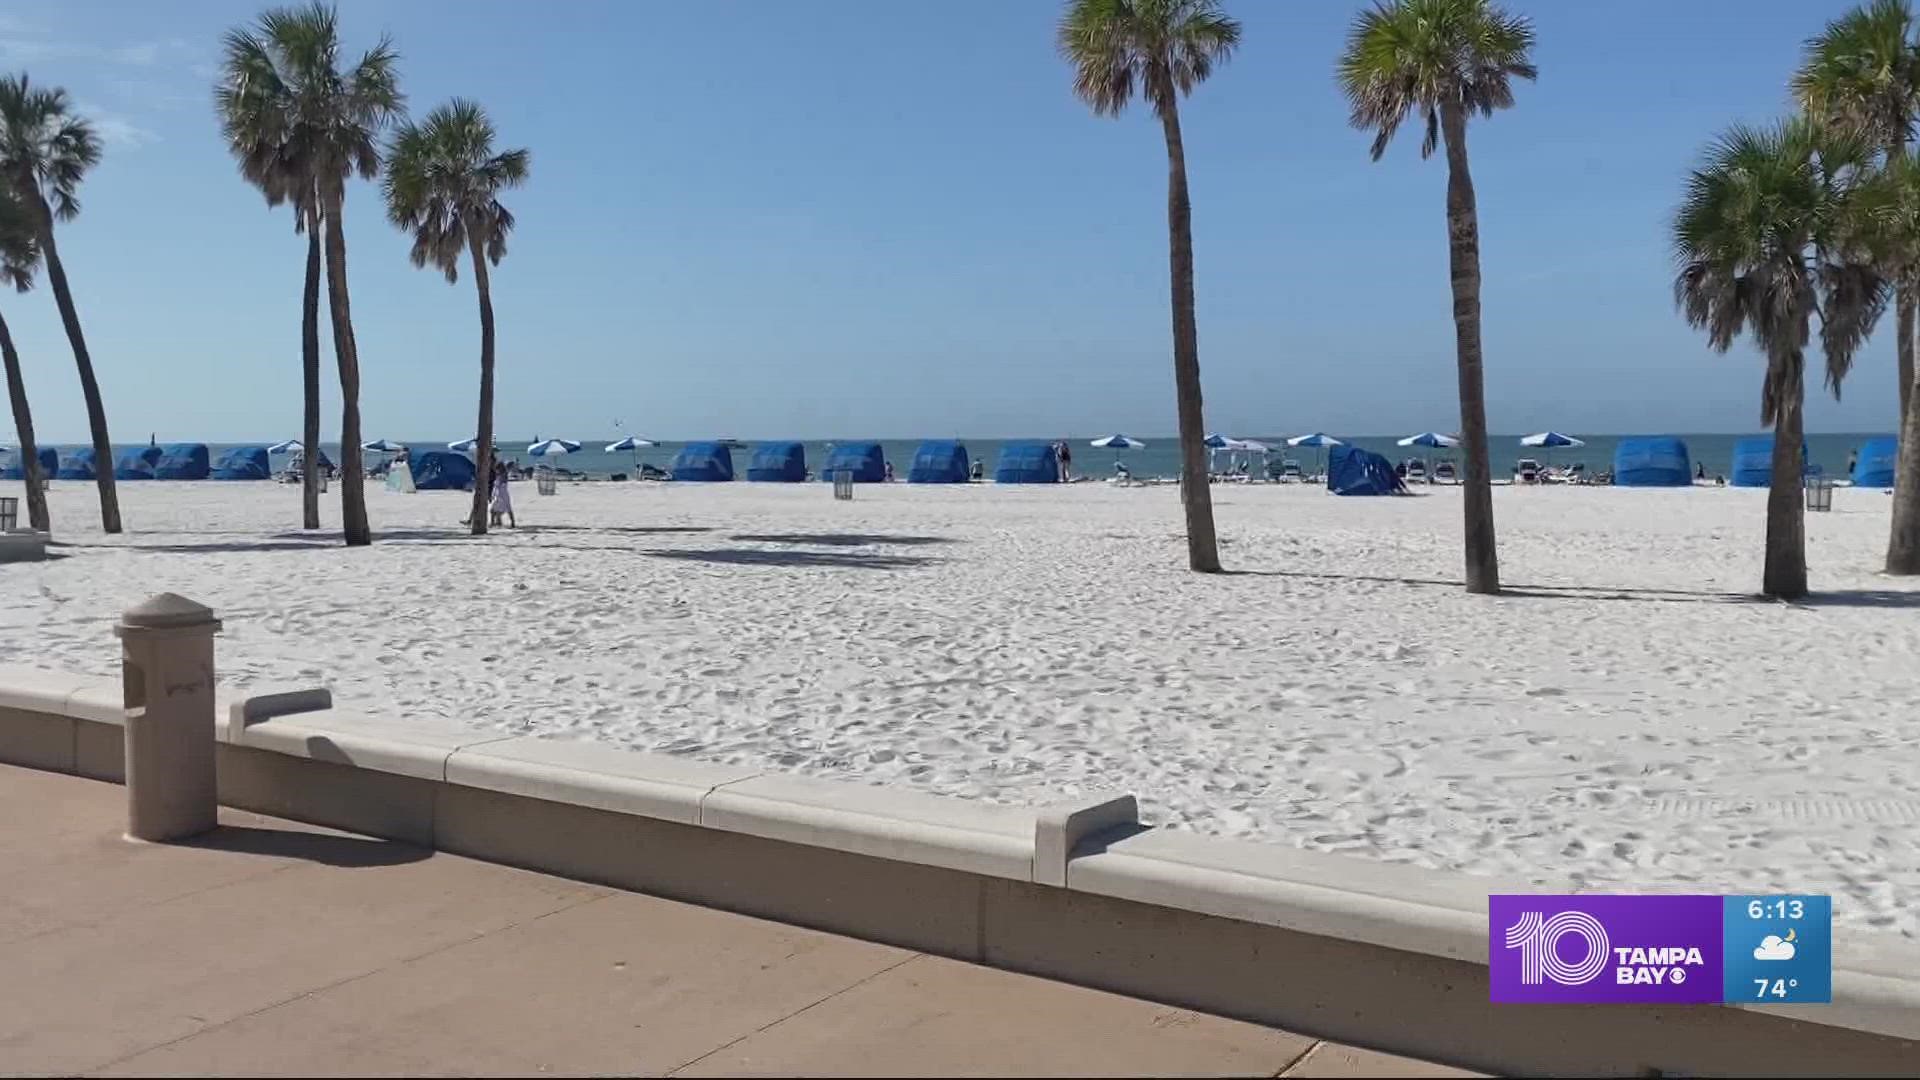 One of the most beautiful beaches in America is starting a renovation project to keep the area in tip-top shape.